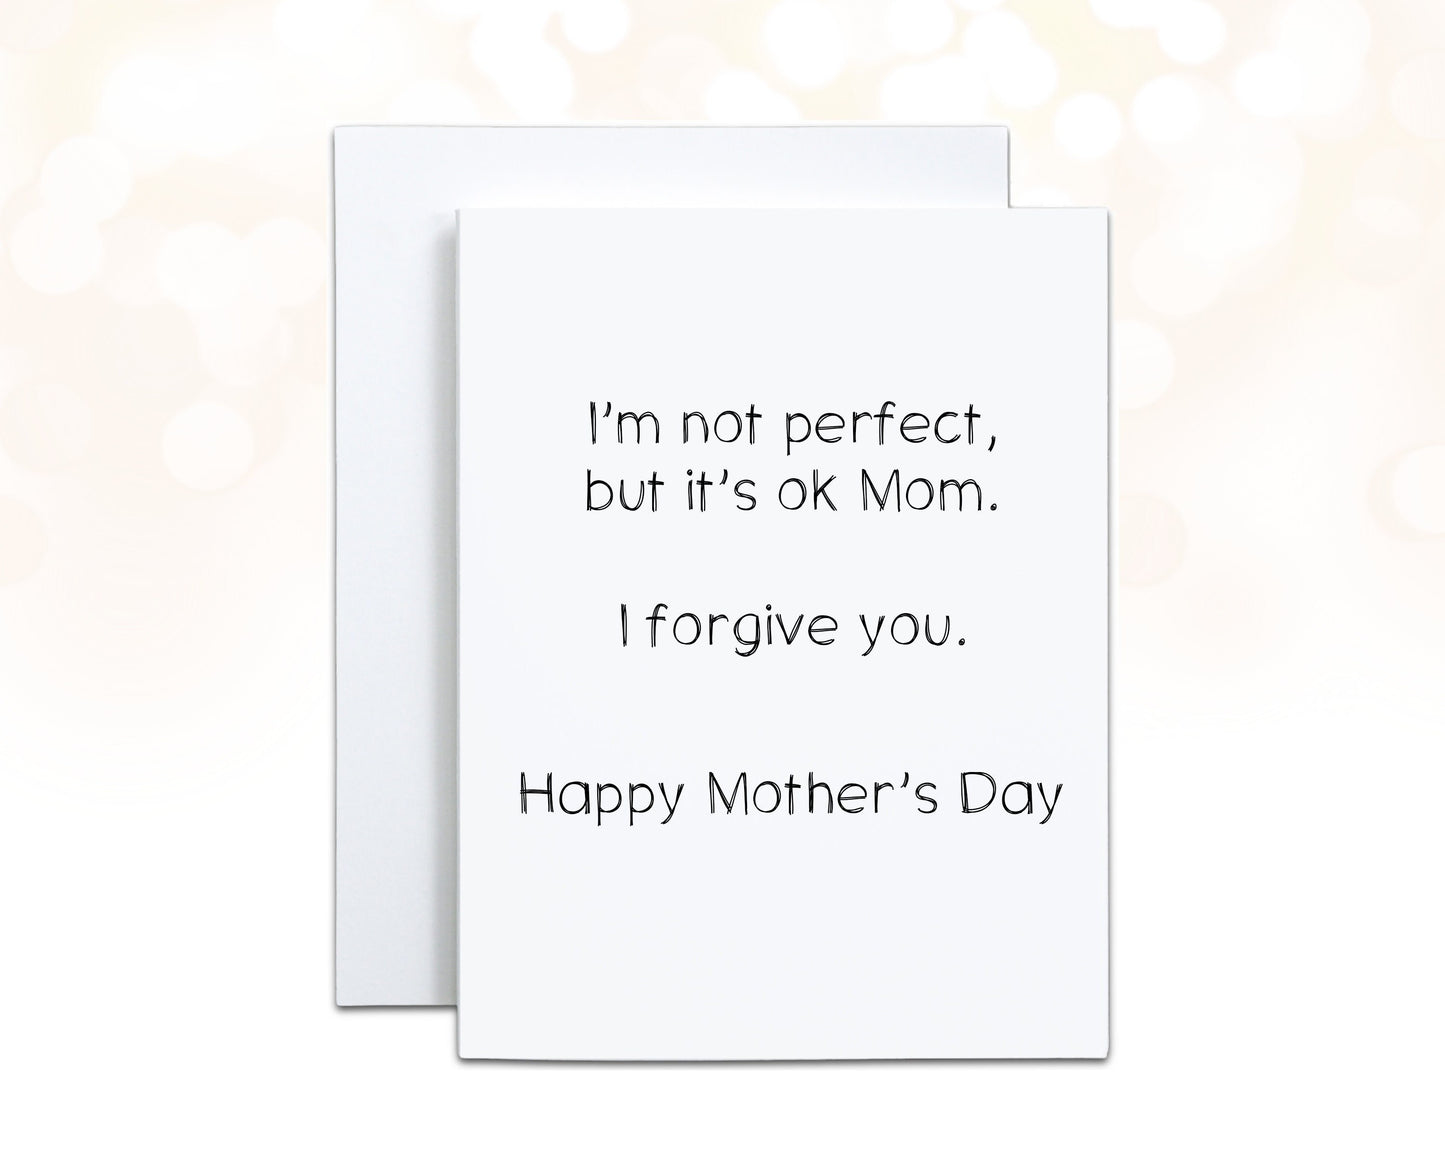 Funny Mother's Day Card, I'm not Perfect Unique Mother's Day Card, Minimalist Mom, Forgiveness, Happy Mother's Day to the Best Mom, A2 Card